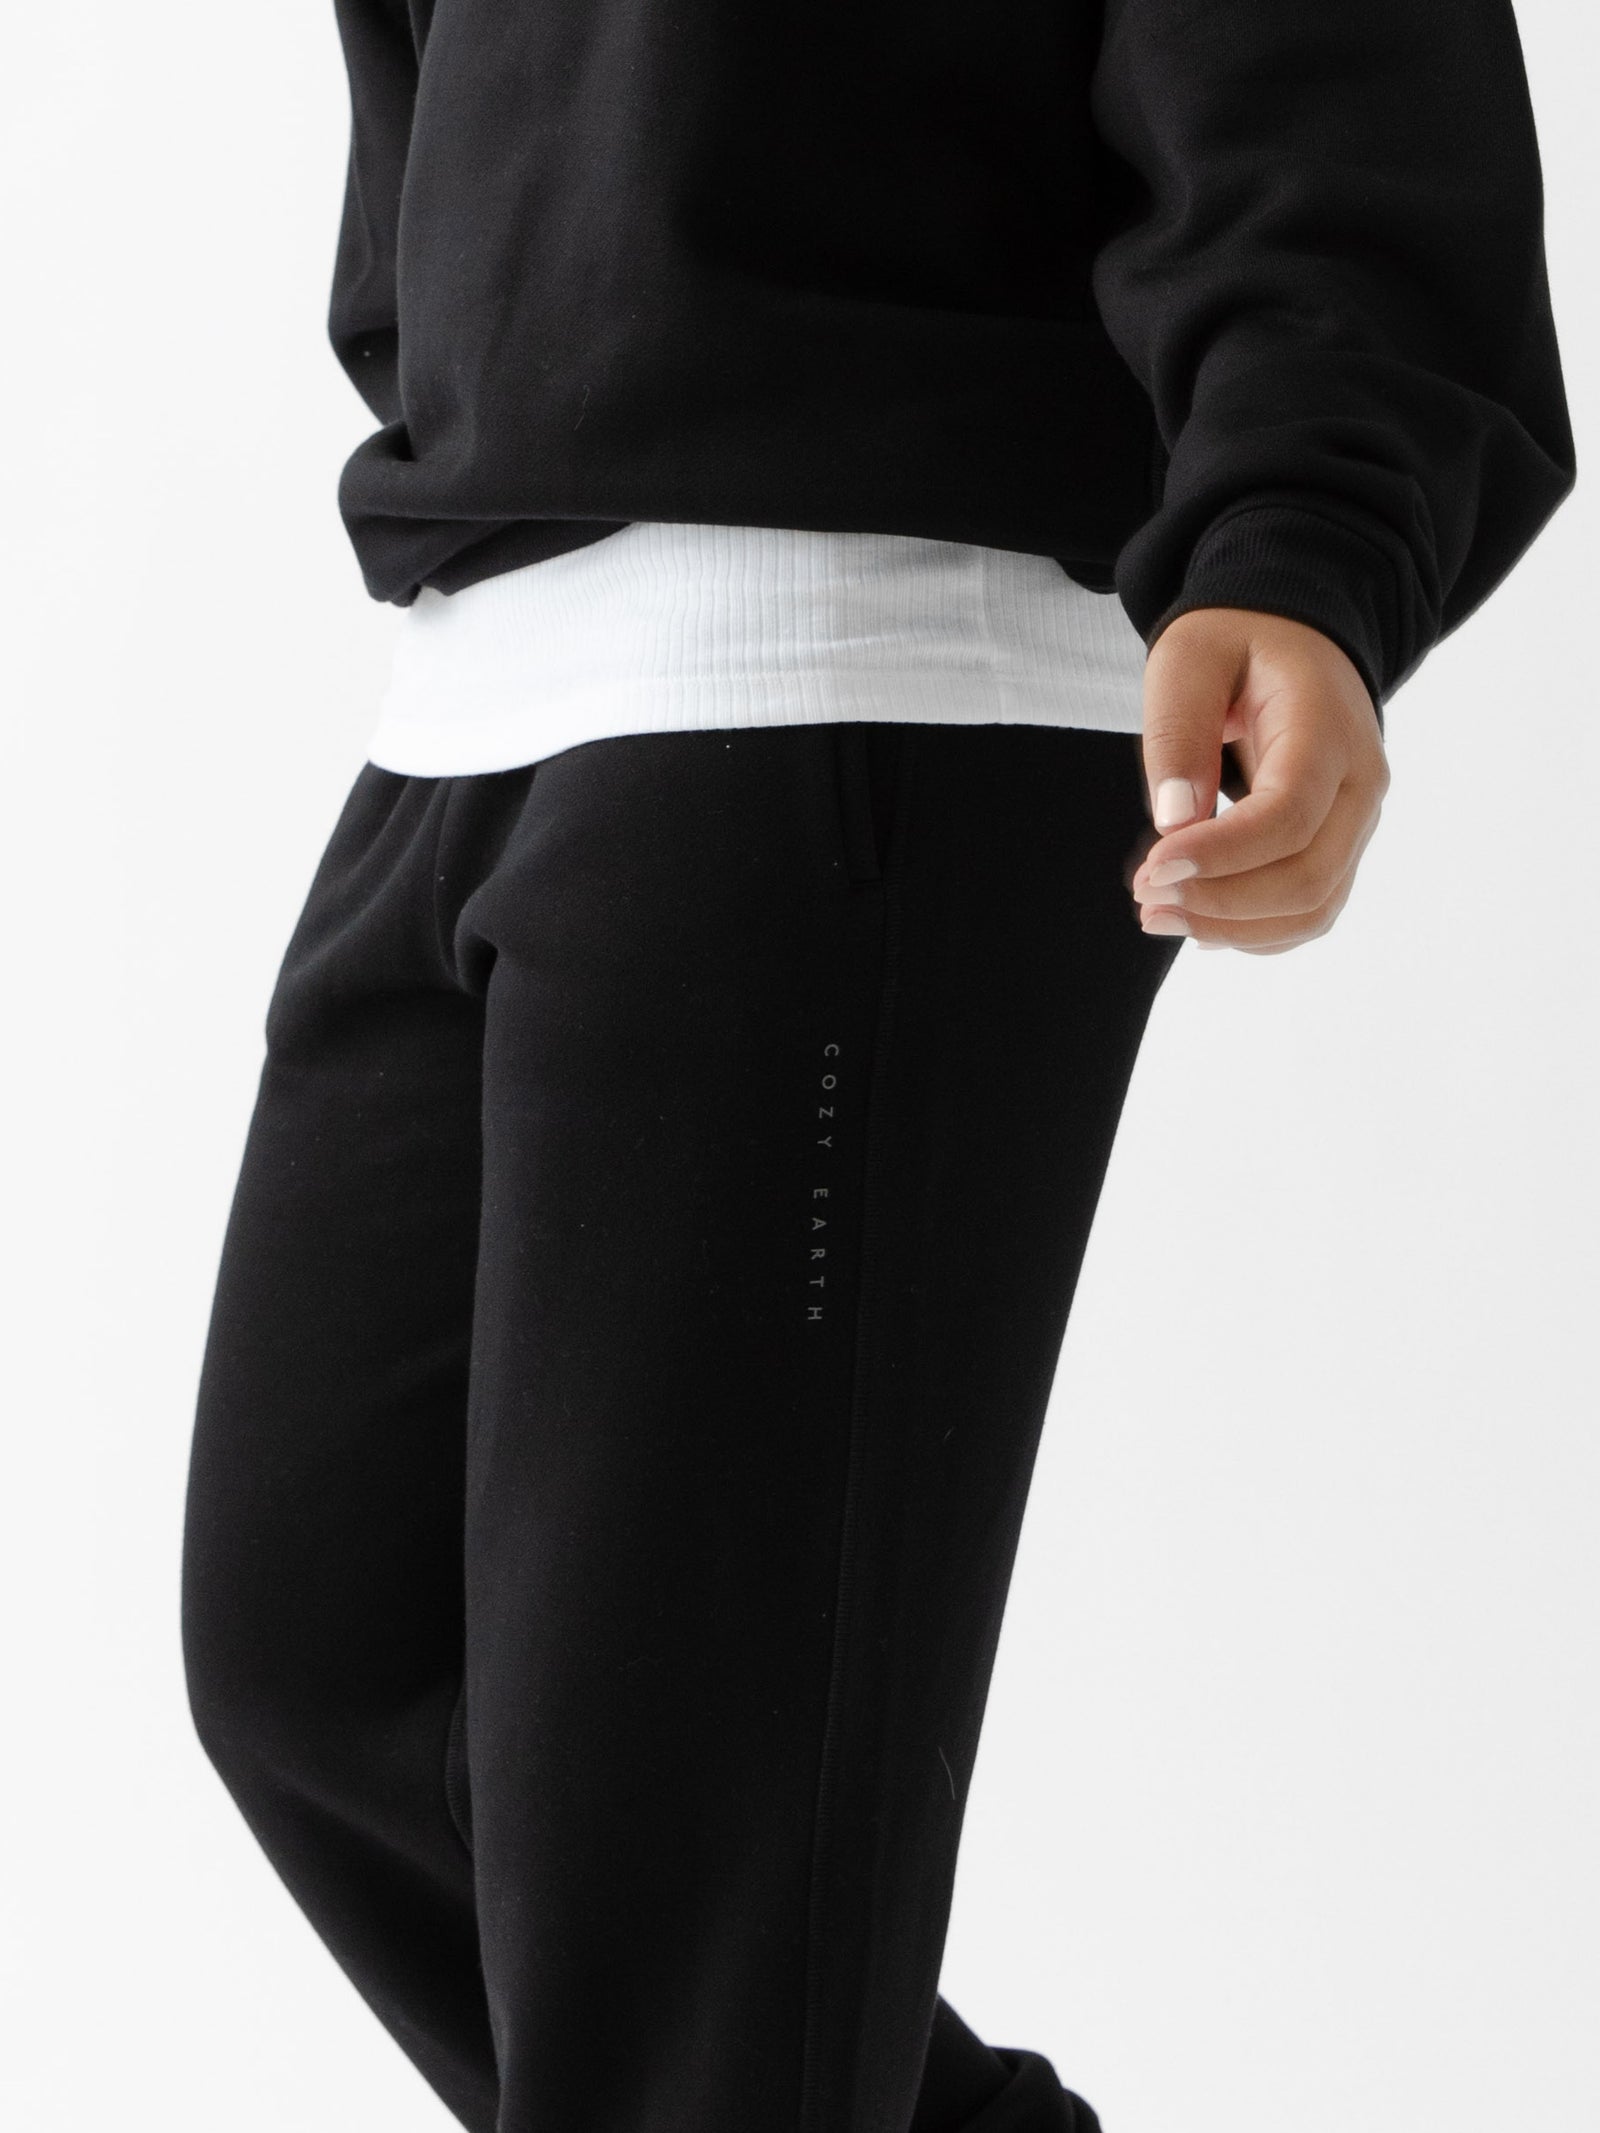 Black CityScape Joggers. The Joggers are being worn by a female model. The photo is taken from the waist down. The back ground is white. 